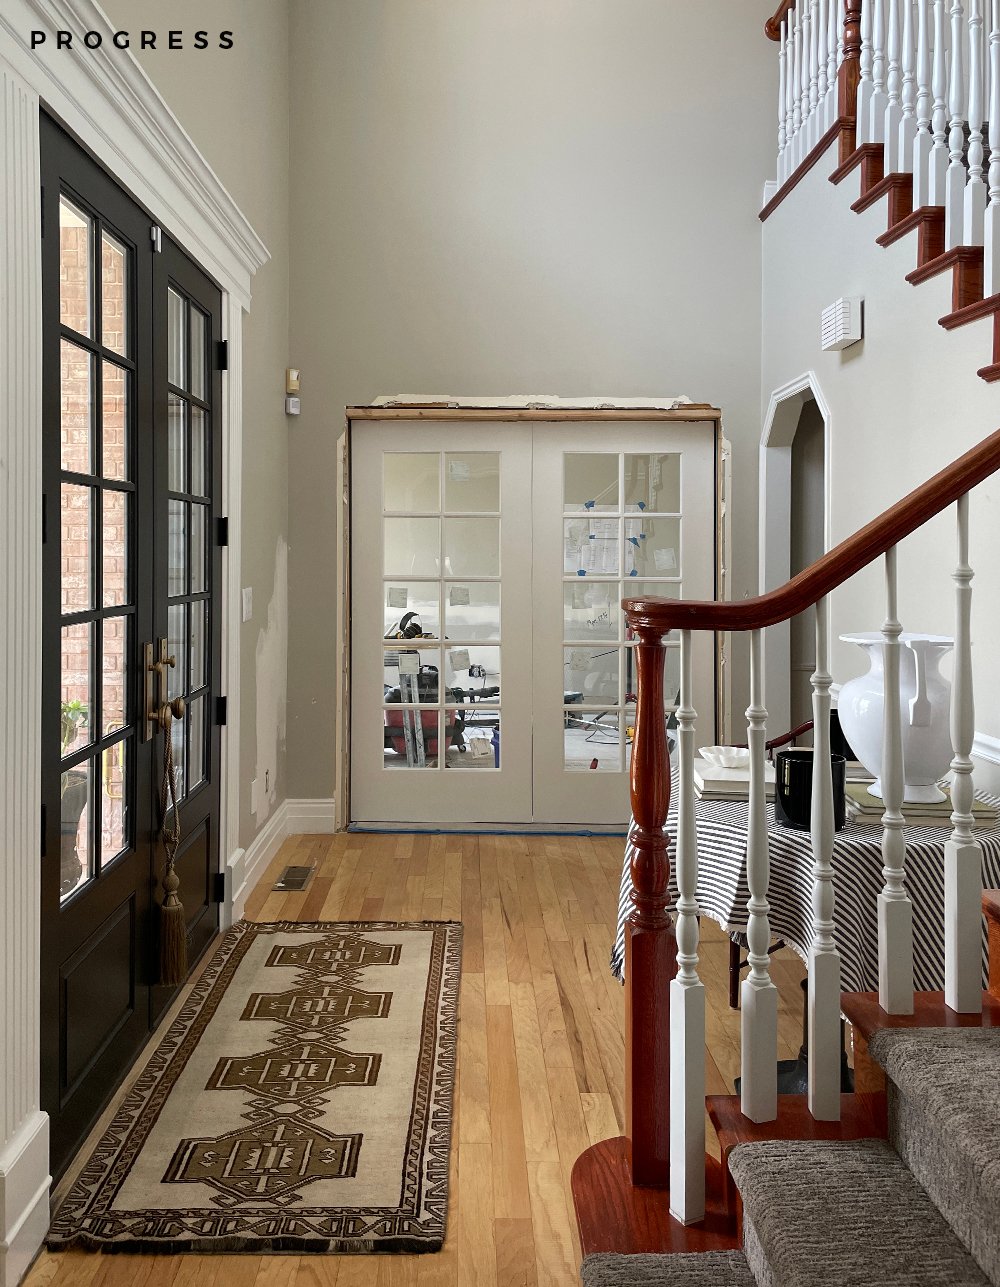 Our Entryway & Staircase Plan - roomfortuesday.com